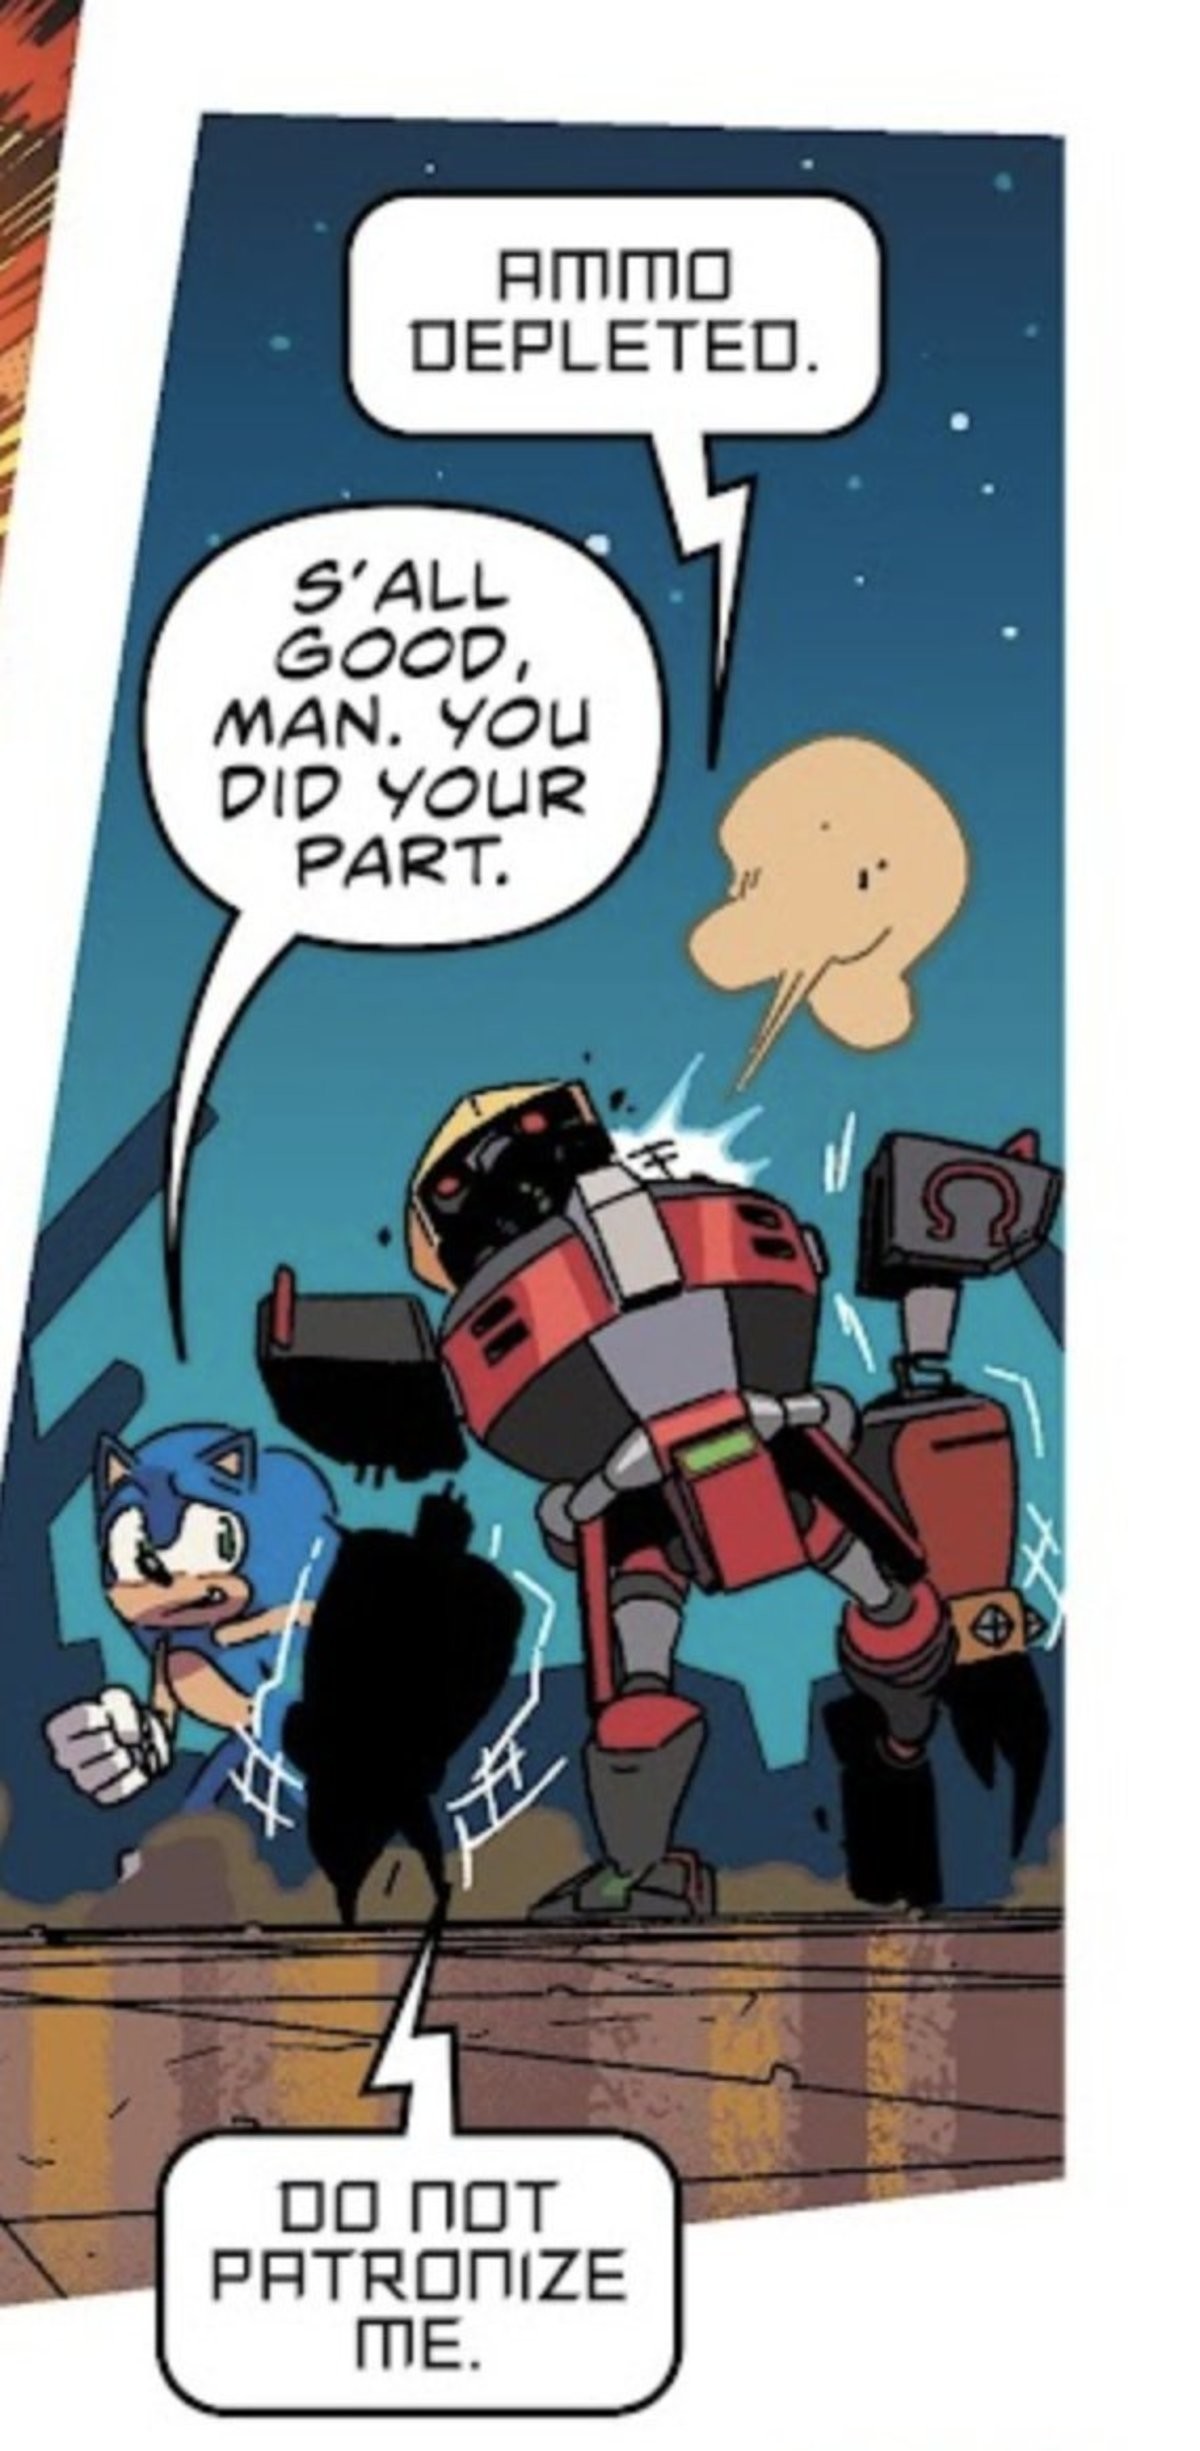 Omega. Sonic the Hedgehog (2018) Issue #32 .. omega is unironically hilarious in those comicsComment edited at .